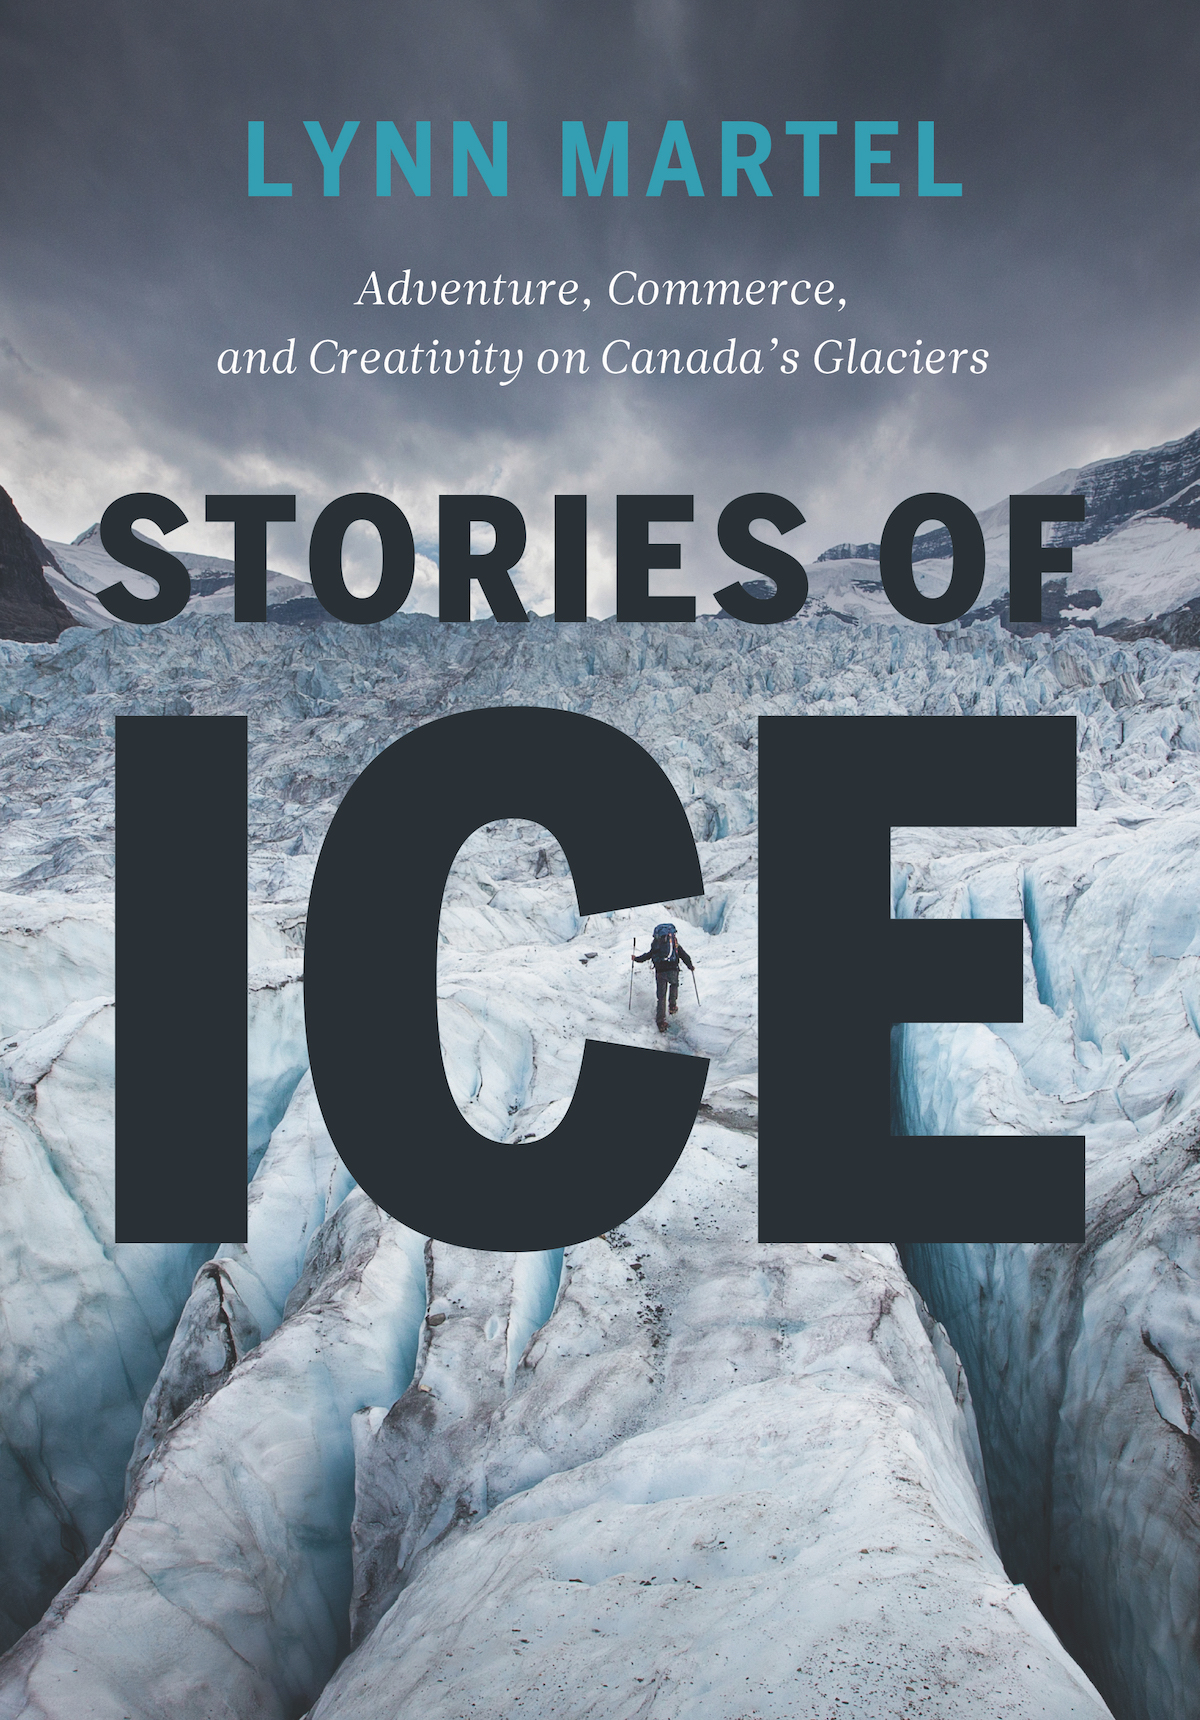 Stories of Ice: Adventure, Commerce and Creativity on Canada's Glaciers by Lynn Martel. Rocky Mountain Books, 2020. 336 pages. Hardcover, $40 (CAN). [Image] Courtesy Rocky Mountain Books